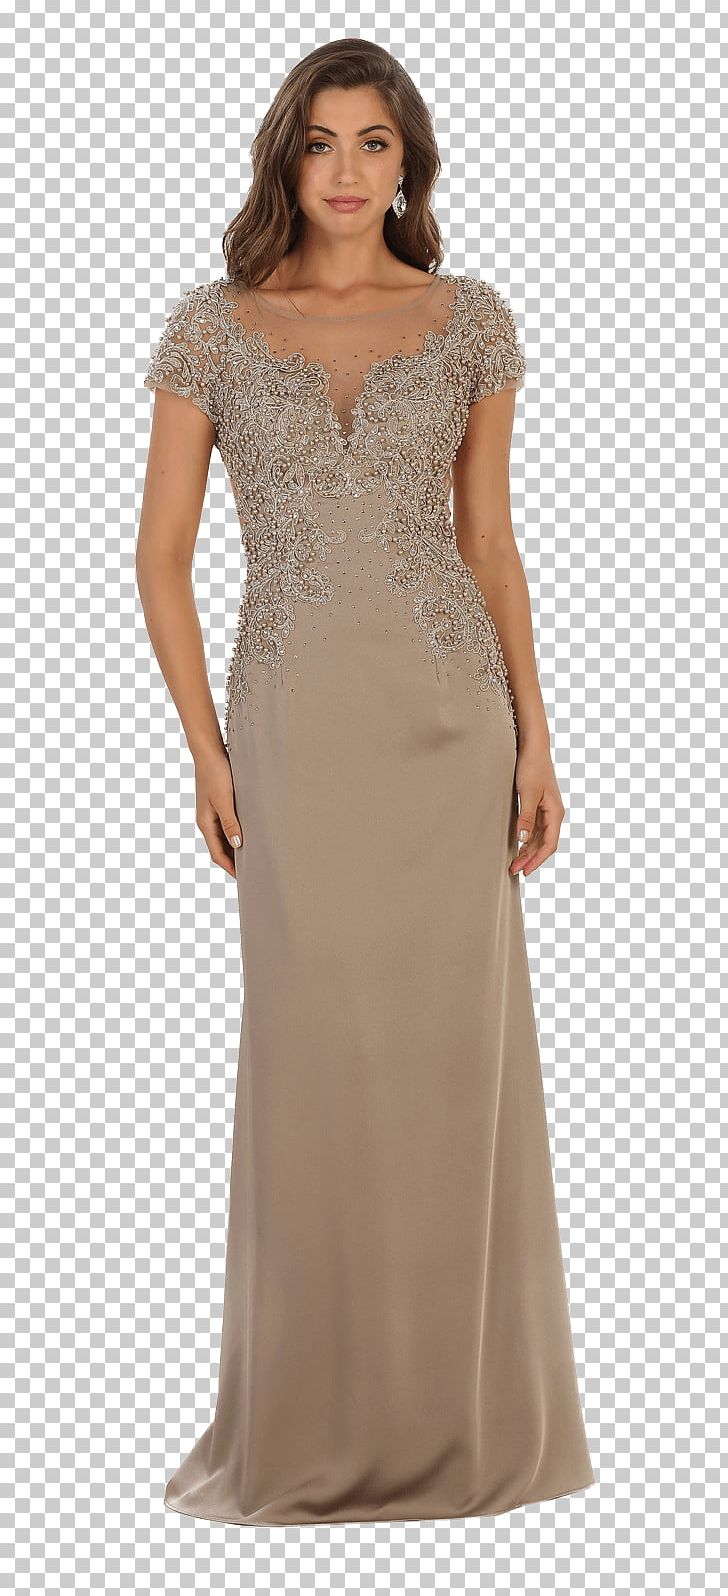 Wedding Dress Evening Gown Cocktail Dress PNG, Clipart, Beige, Bridal Clothing, Bridal Party Dress, Bride, Clothing Free PNG Download